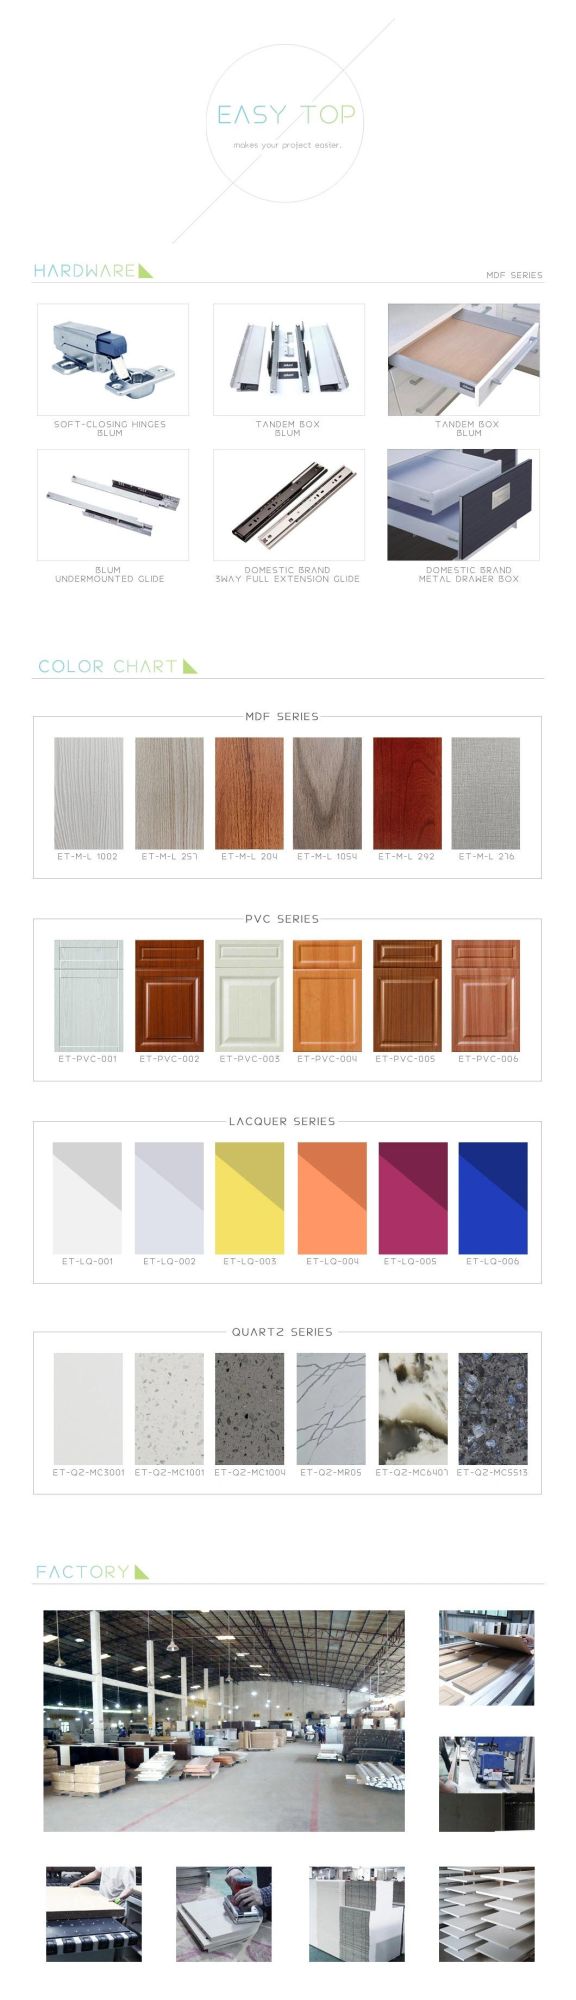 China Modern Waterproof Lacquer Grey L-Shaped Kitchen Cabinets with High Quality Hardware